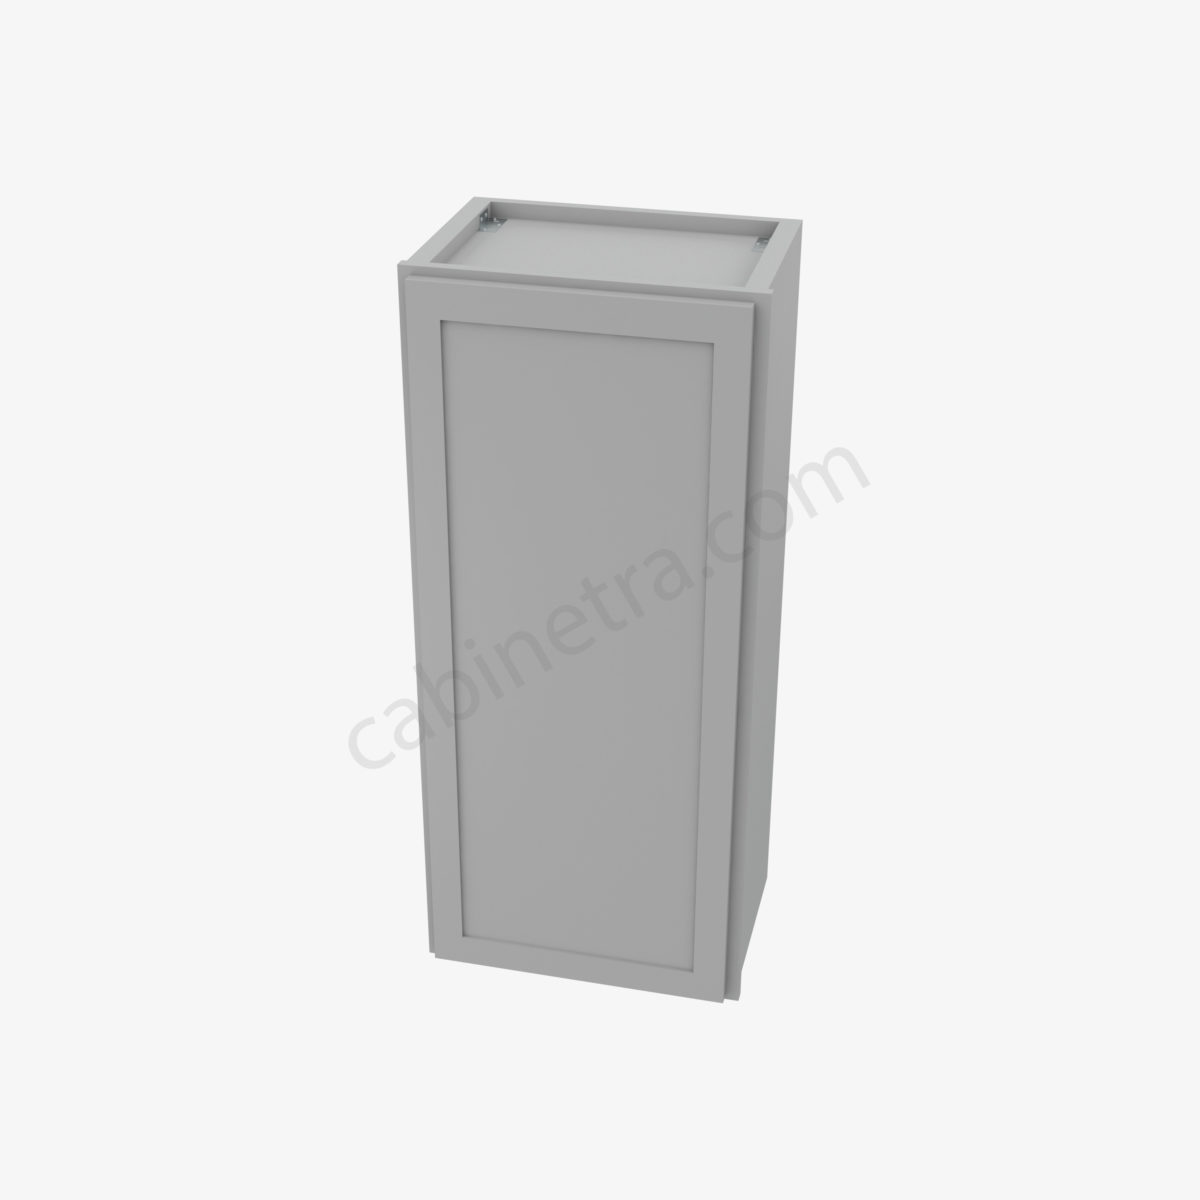 AB W1842 3 Forevermark Lait Gray Shaker Cabinetra scaled